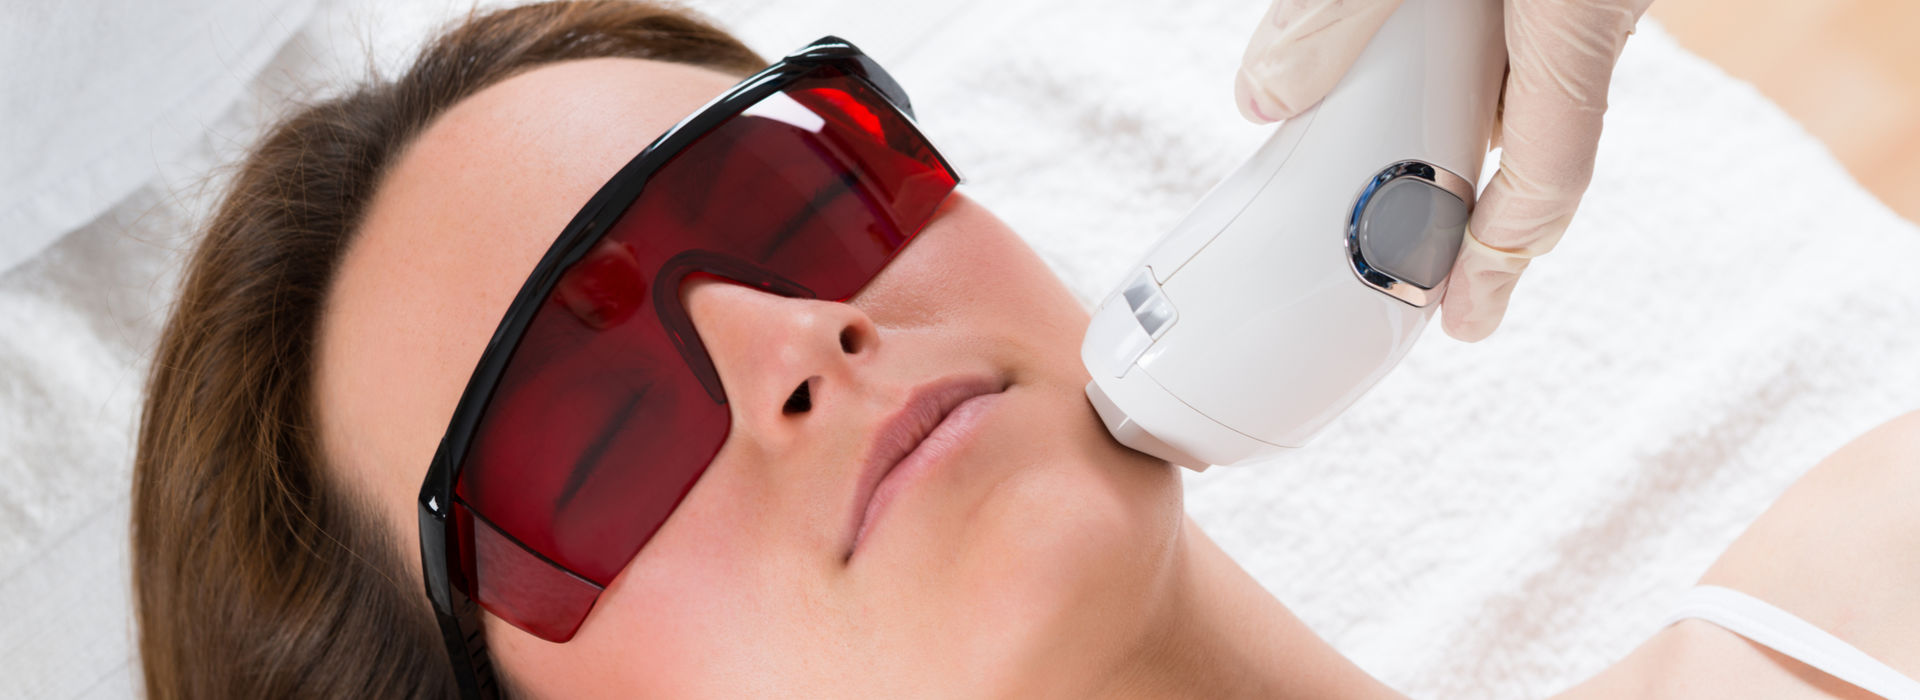 A woman is getting a laser treatment.